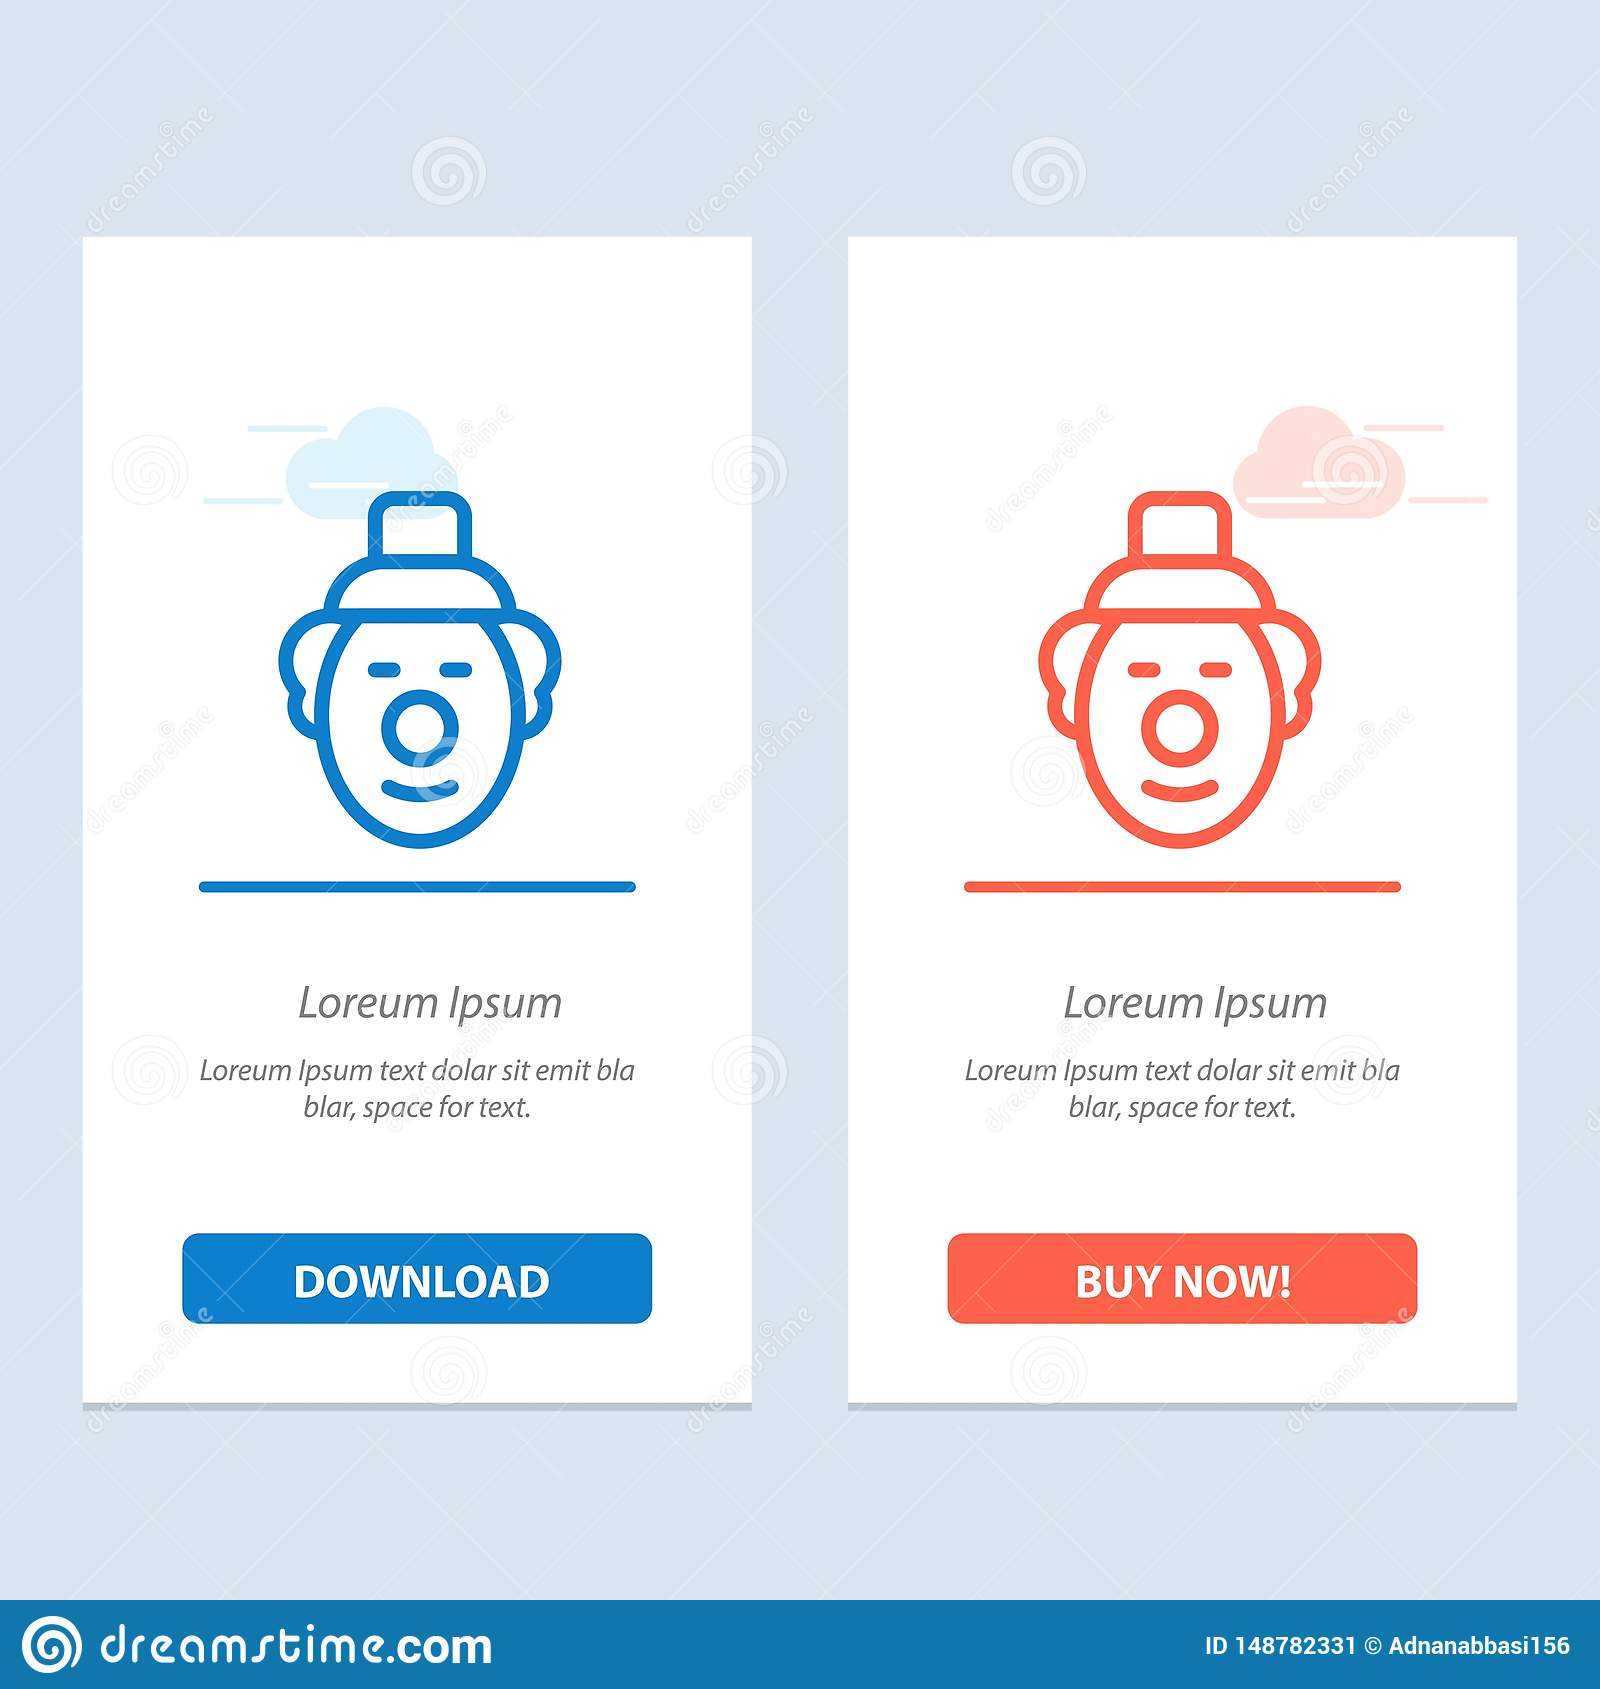 Joker, Clown, Circus Blue And Red Download And Buy Now Web In Joker Card Template